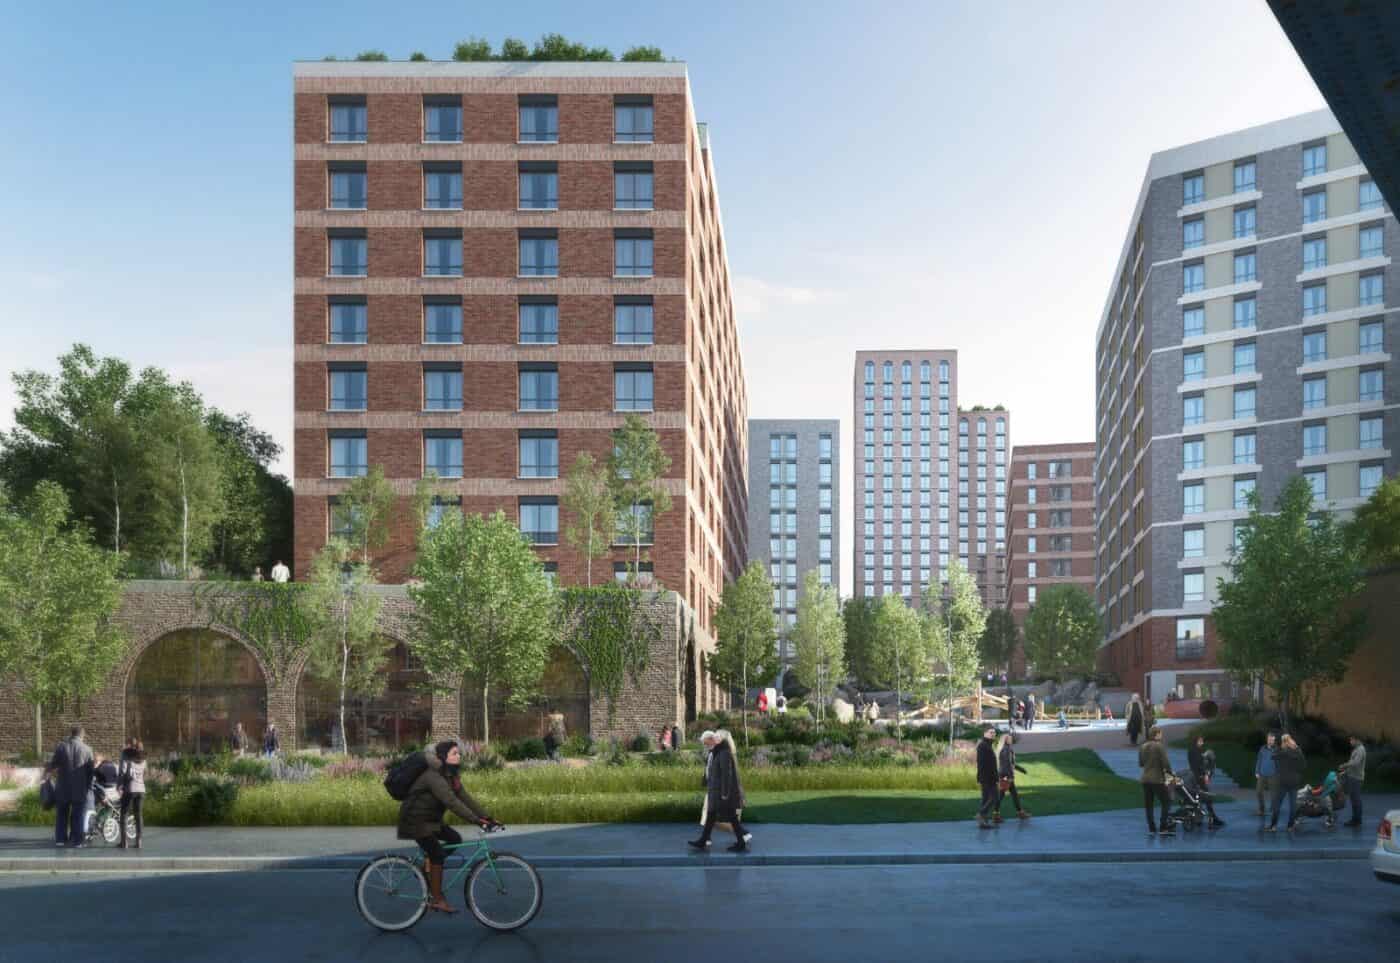 CGI of planned Glasgow apartment blocks with trees and greenery below